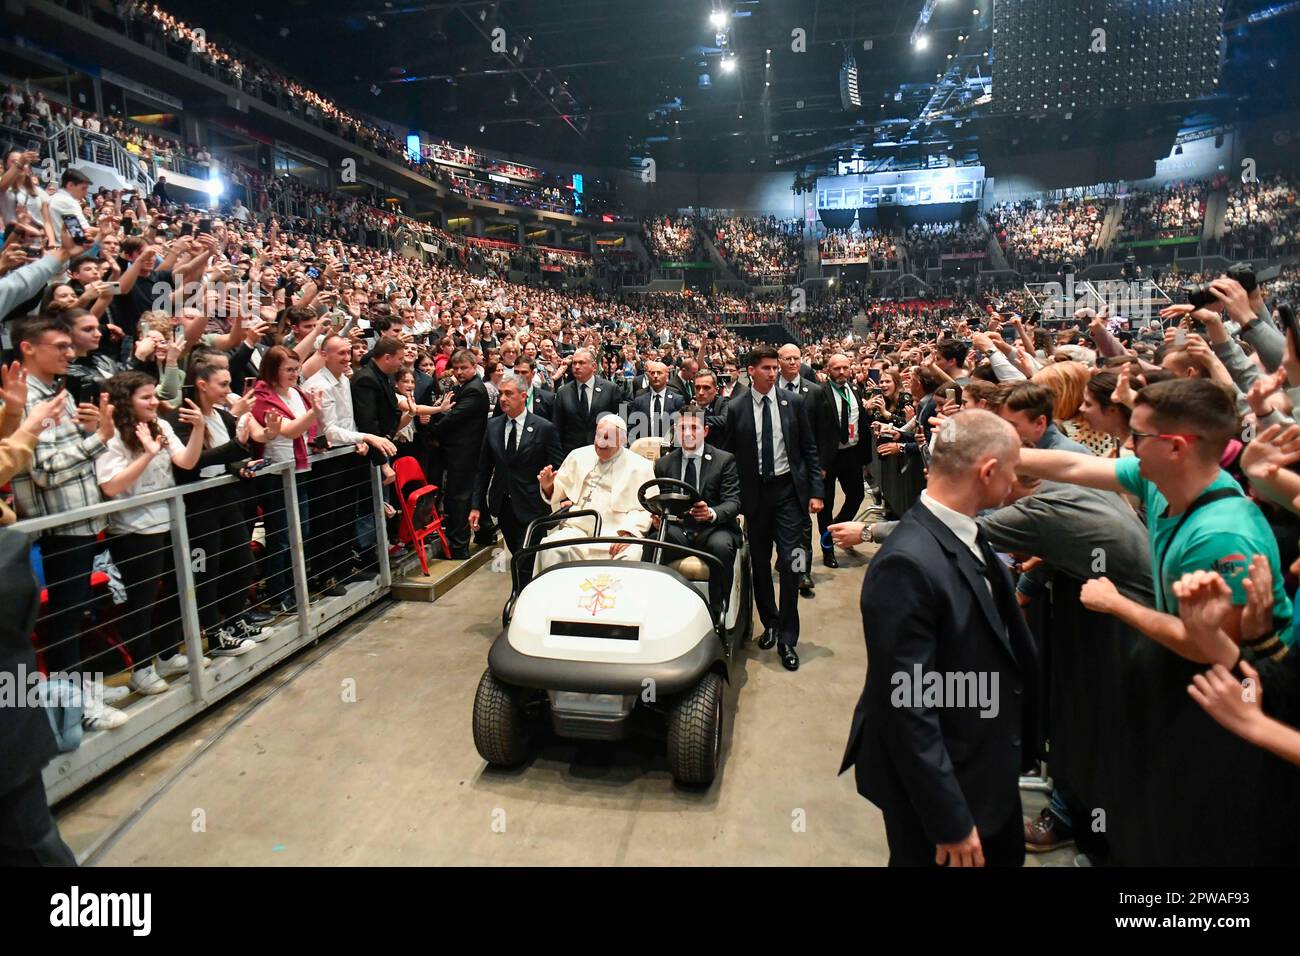 Hungary, Hu. 29th Apr, 2023. Hungary, 2023/4/29 .Pope Francis on stage as he meets with young people in the Papp Laszlo Budapest Sports Arena in Budapest, Hungary . Photograph by Vatican Media /Catholic Press Photo . RESTRICTED TO EDITORIAL USE - NO MARKETING - NO ADVERTISING CAMPAIGNS. Credit: Independent Photo Agency/Alamy Live News Stock Photo